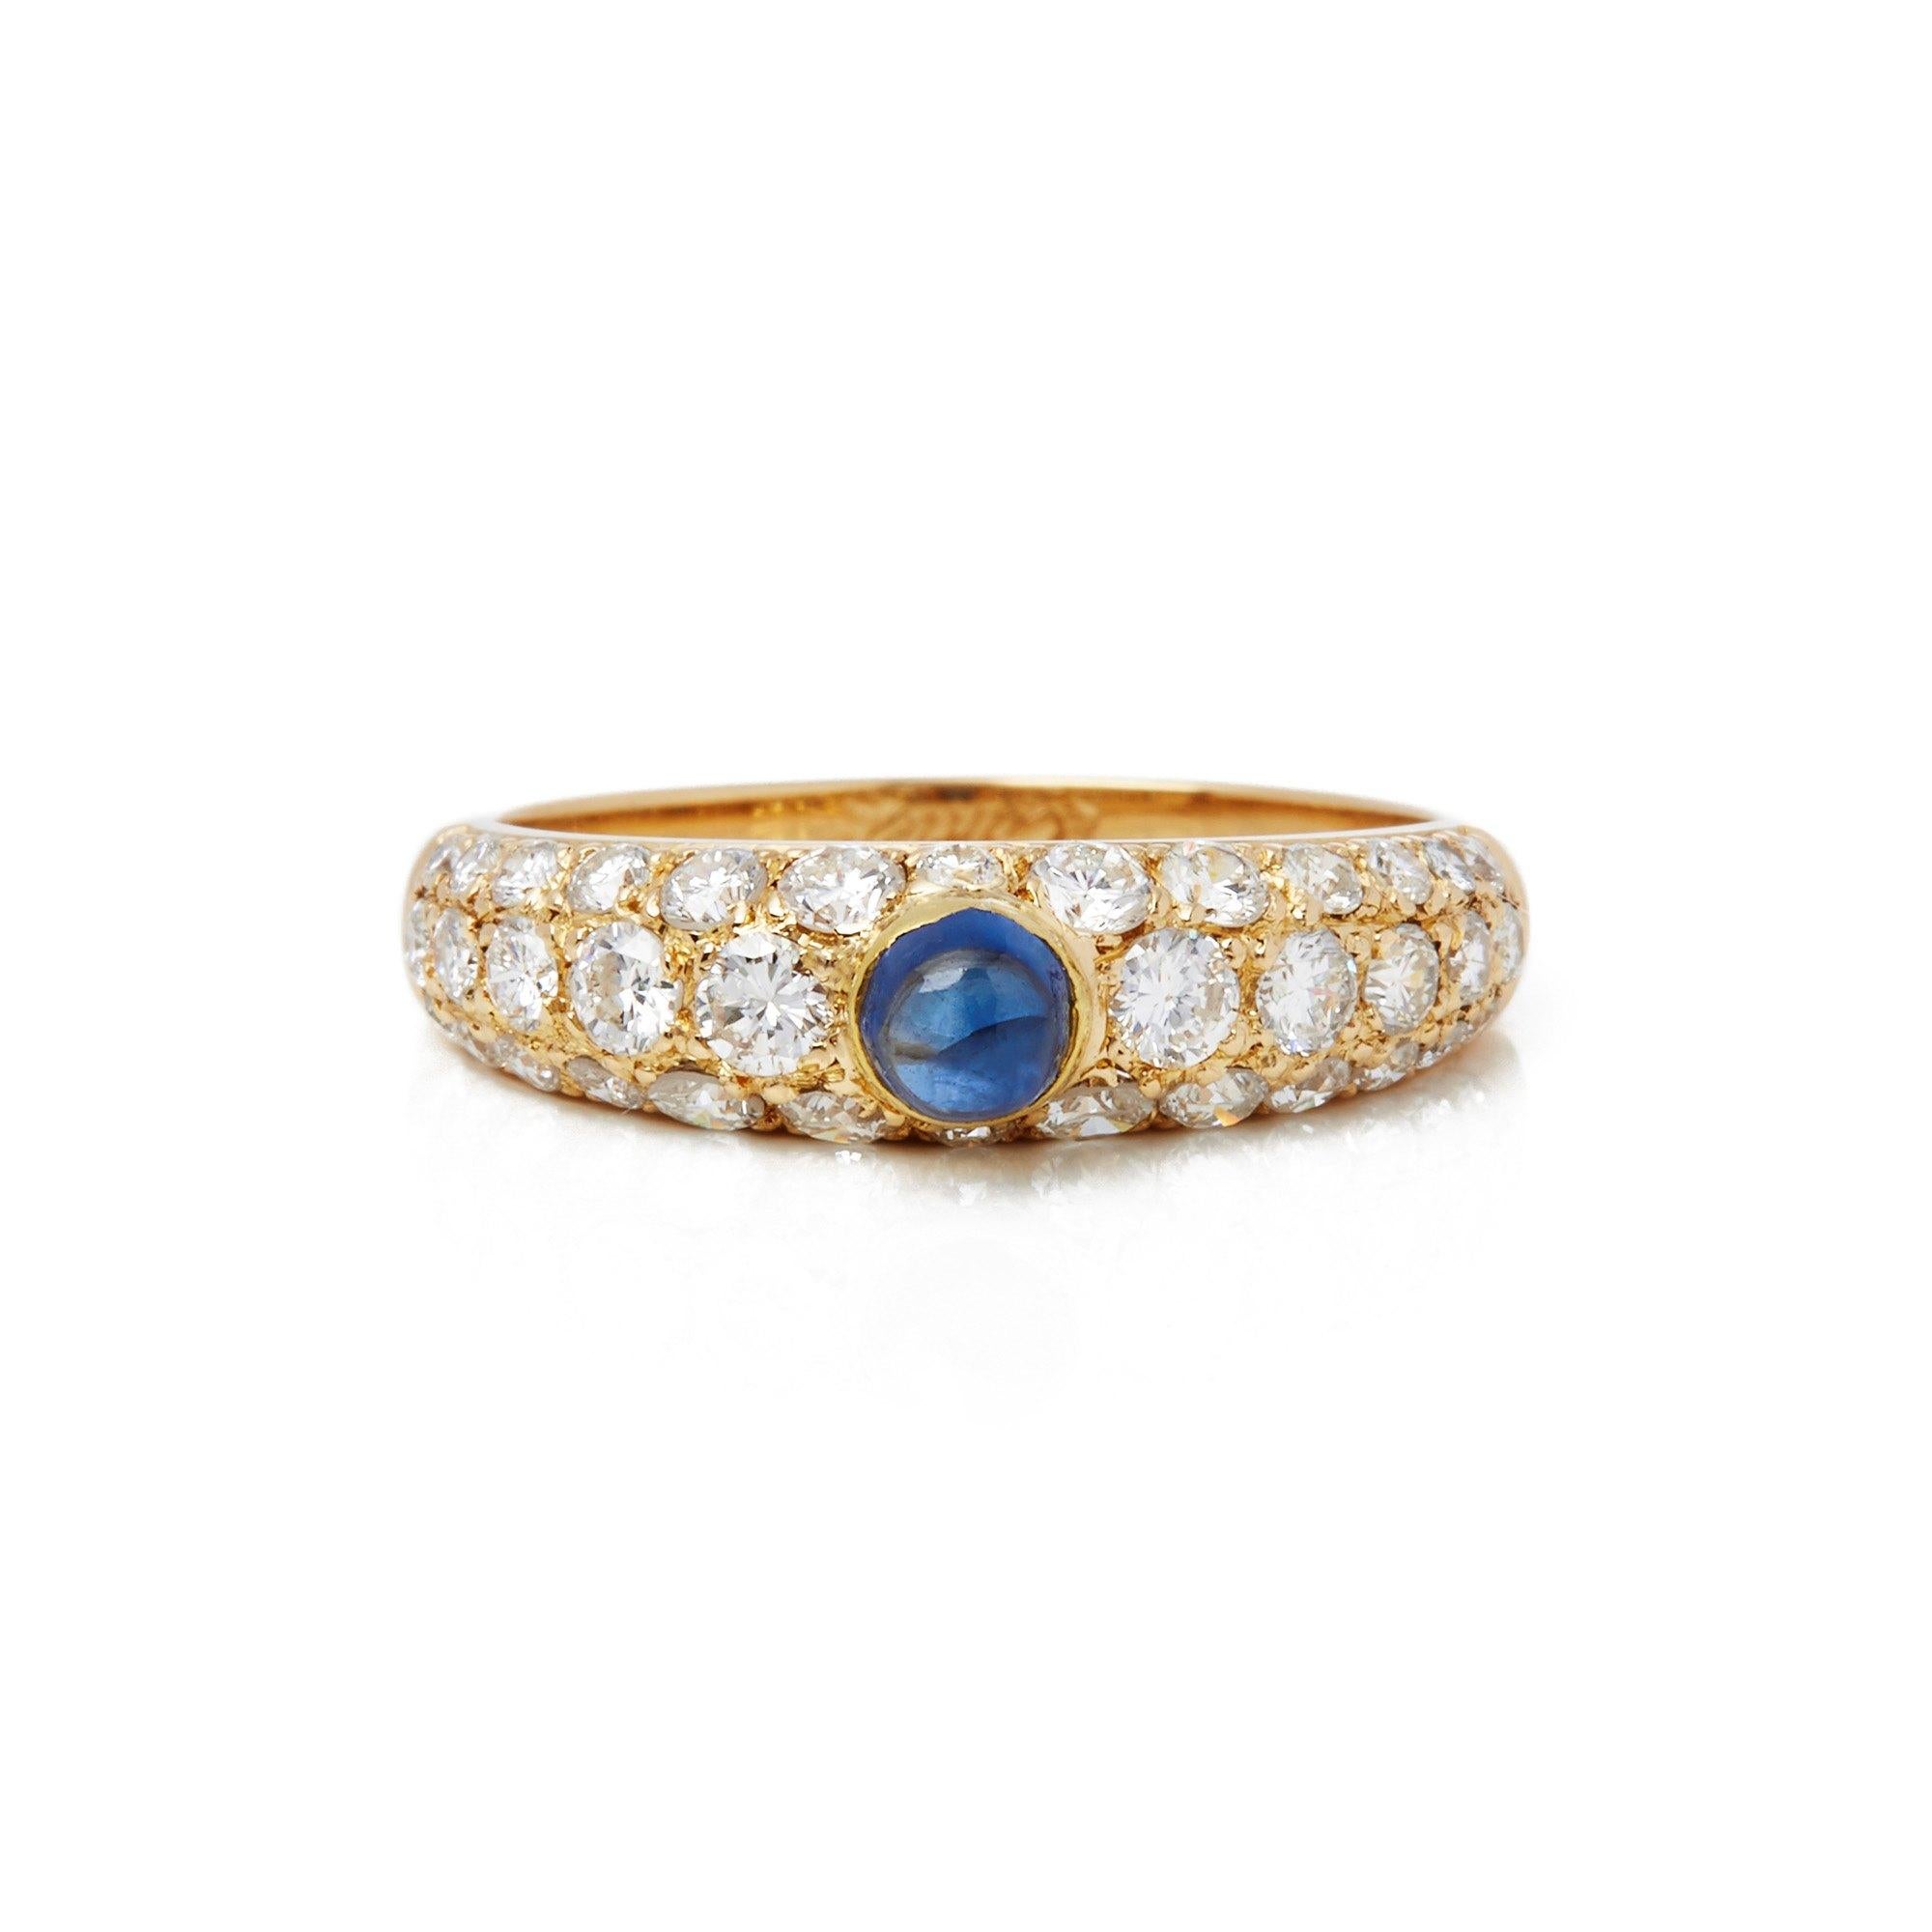 Ring by Cartier features One 0.20ct Cabochon Cut Sapphire Set with Thirty Six Round Brilliant Cut Diamonds Pave Set Mounted in an 18k Yellow Gold Band. Total diamond weight 1.22ct. Finger Size UK M, EU 53, USA 6 1/2. Complete with Original Cartier